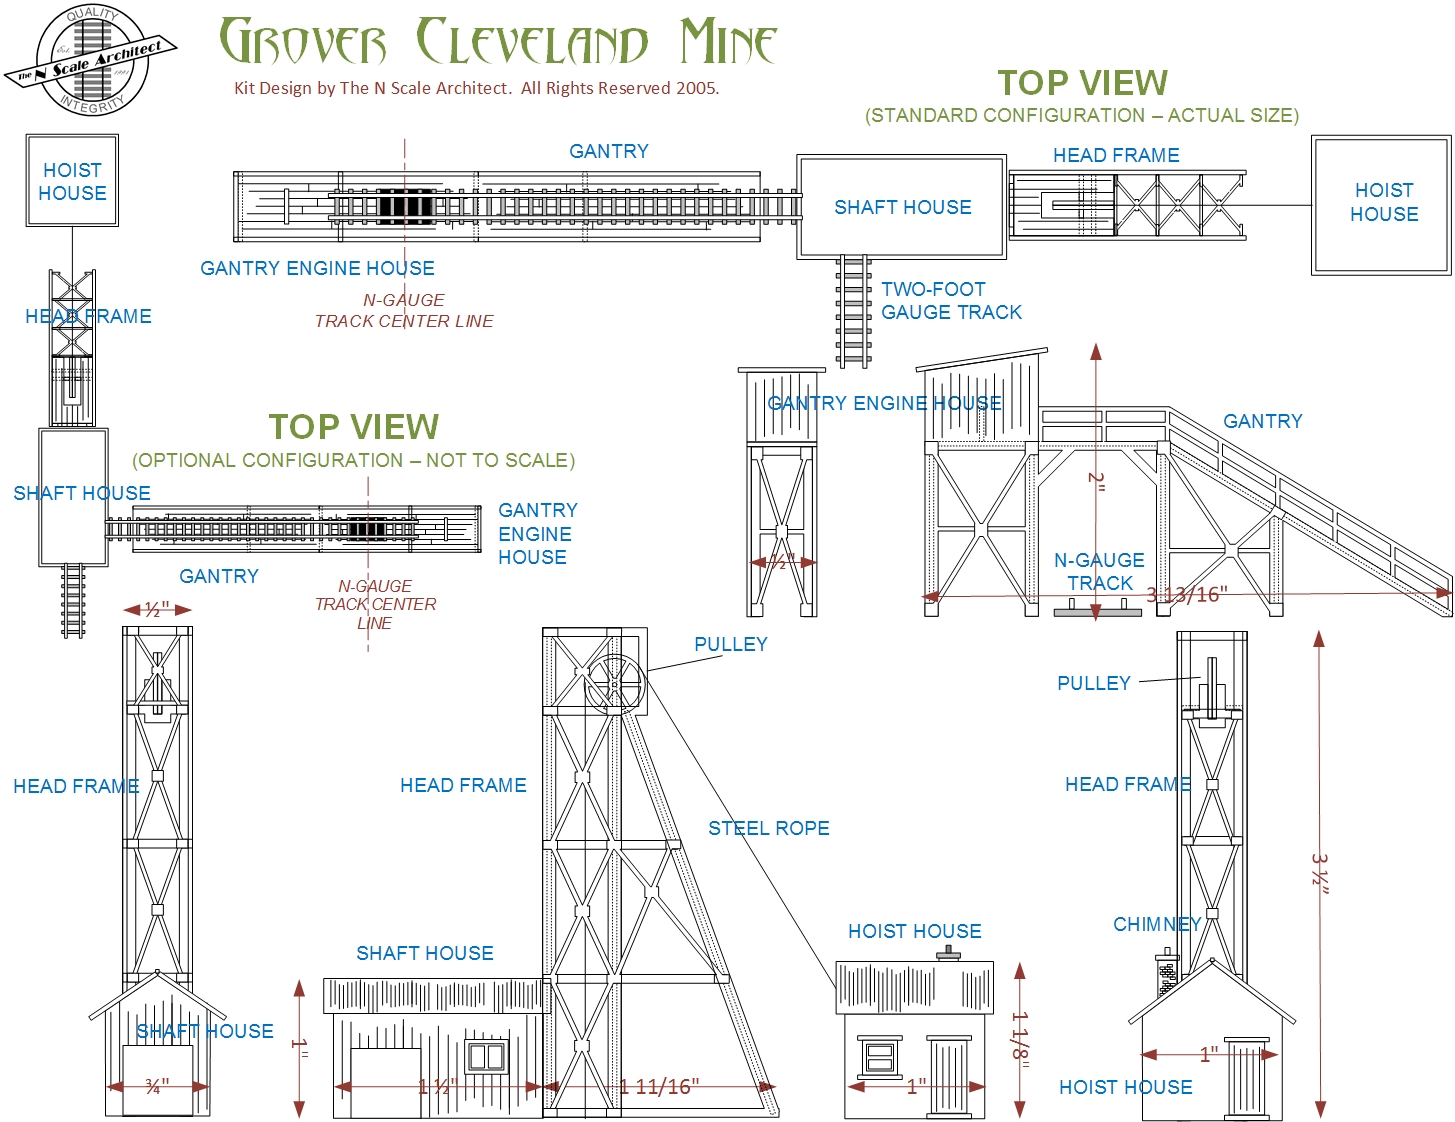 Grover Cleveland Mine - Dimensions & Floor Plans